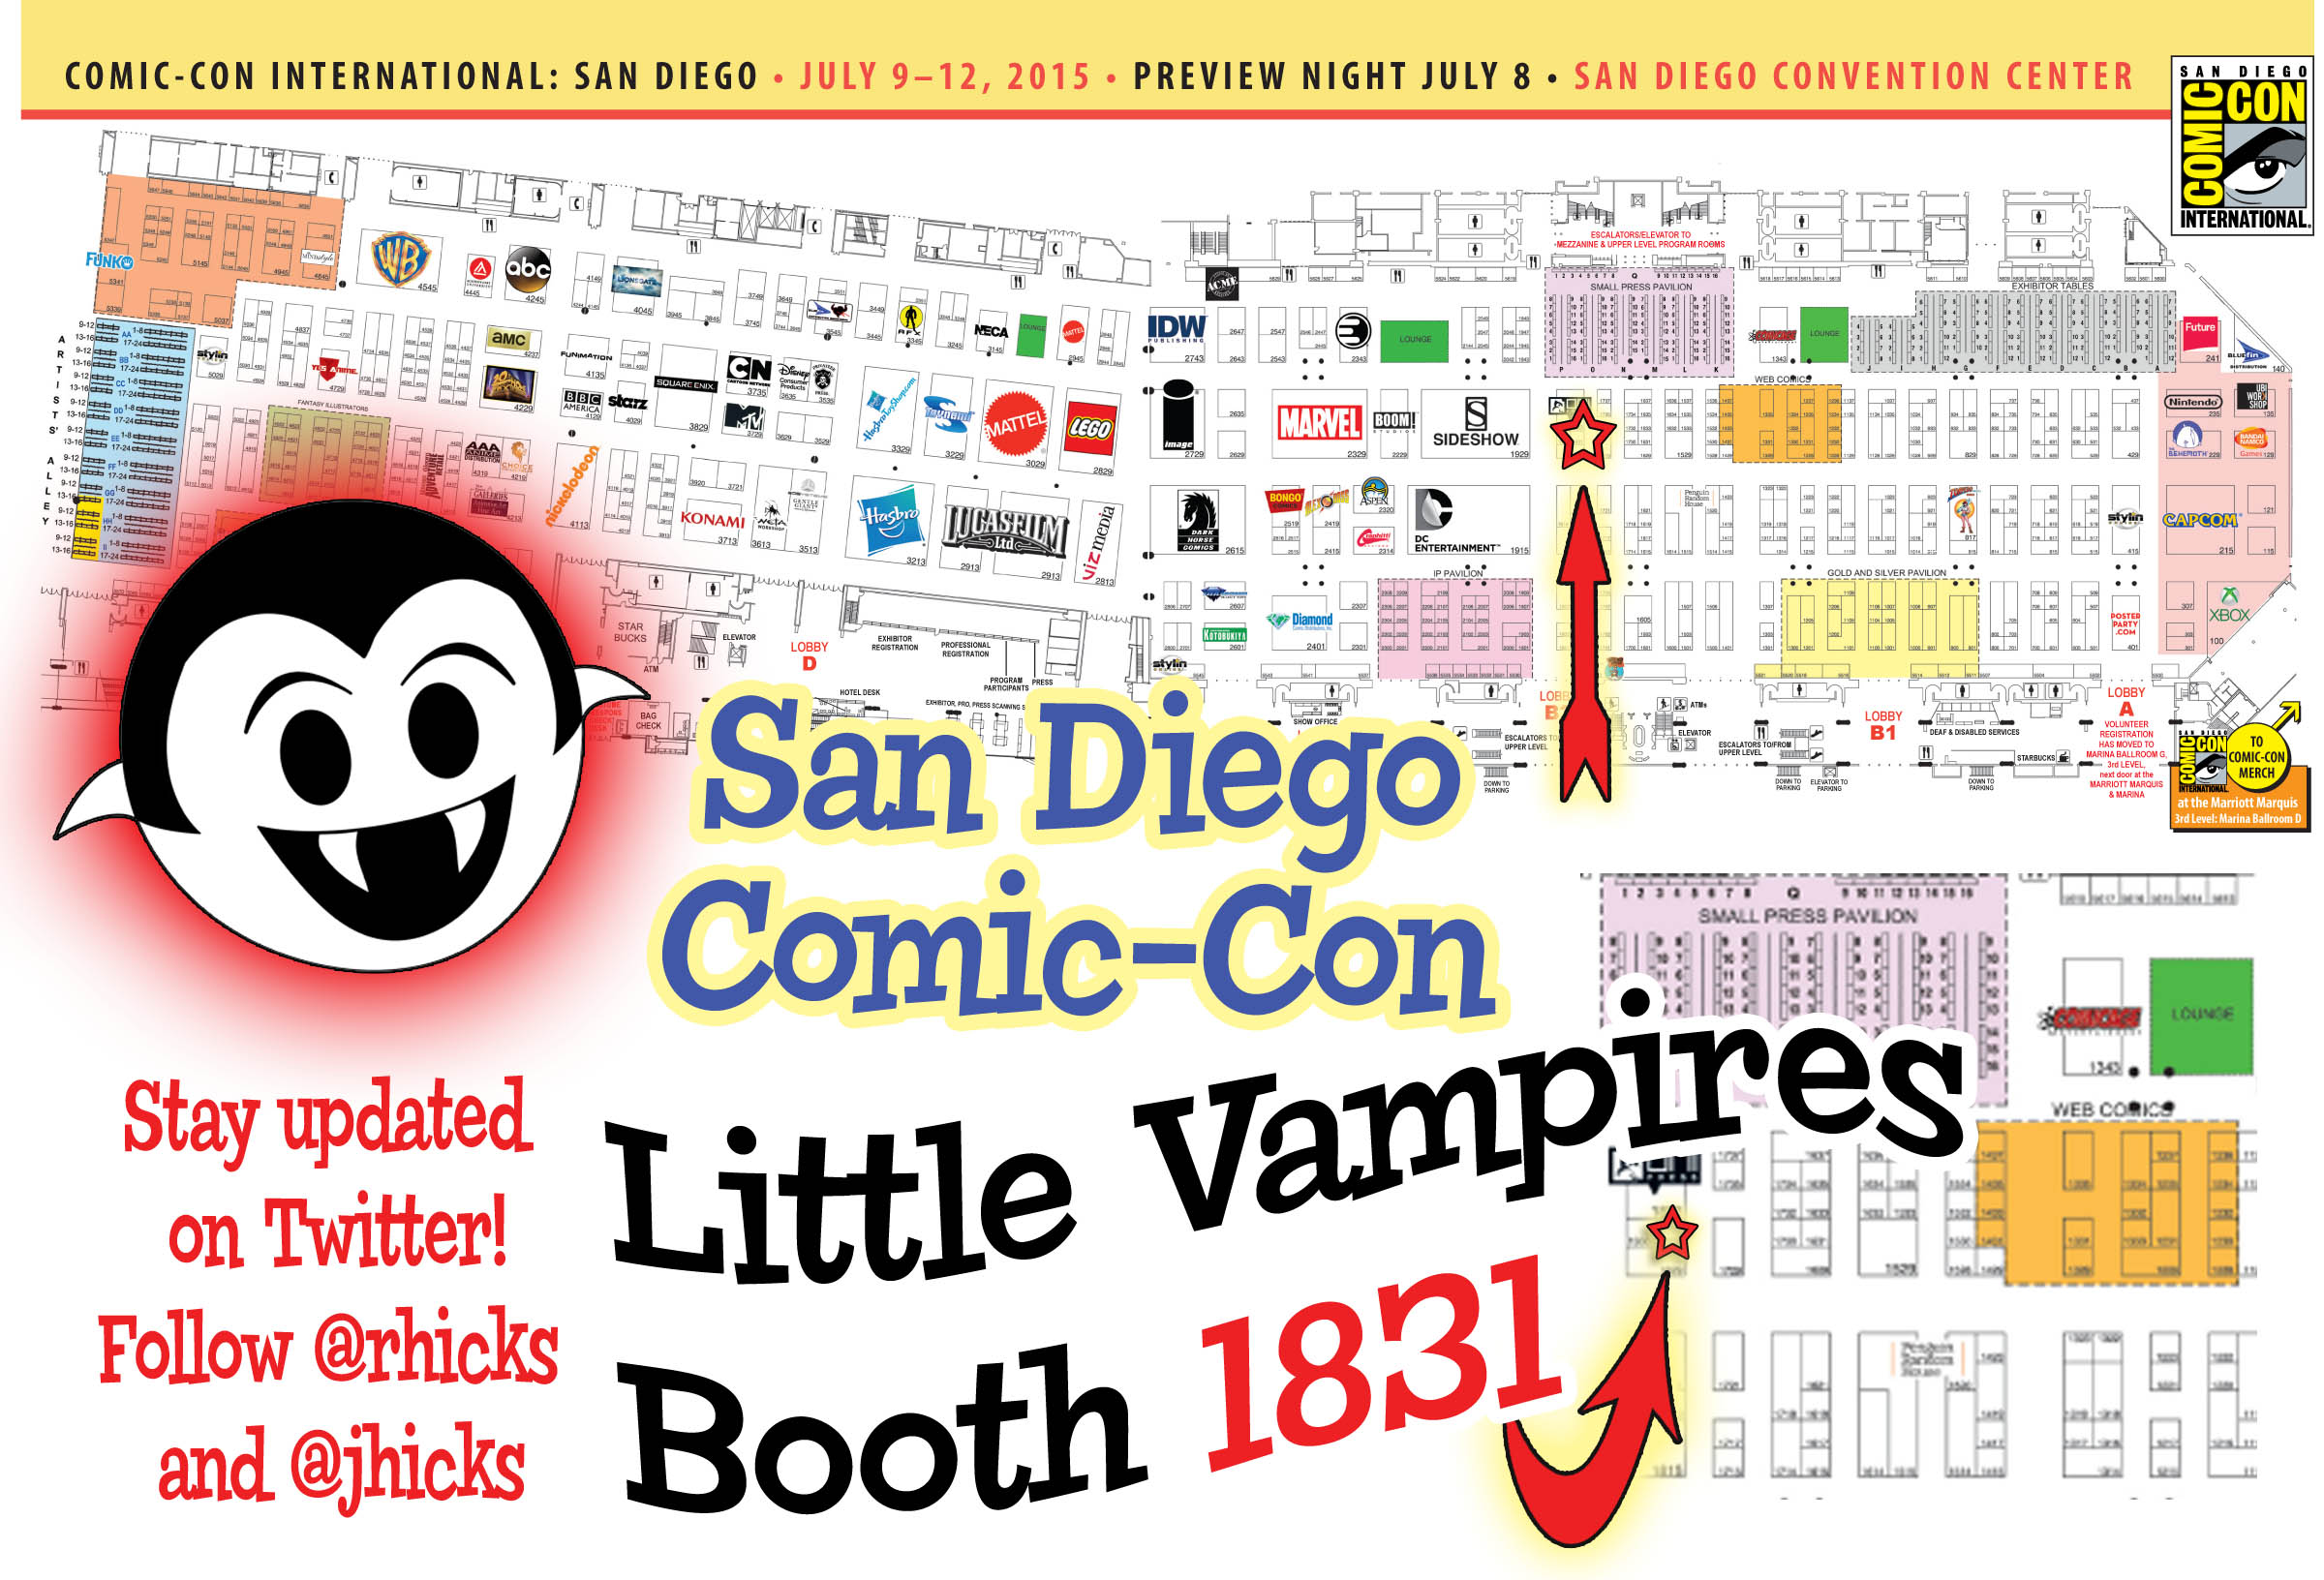 San Diego Comic-Con 2015 exhibitor floor map with the Little Vampires booth highlighted